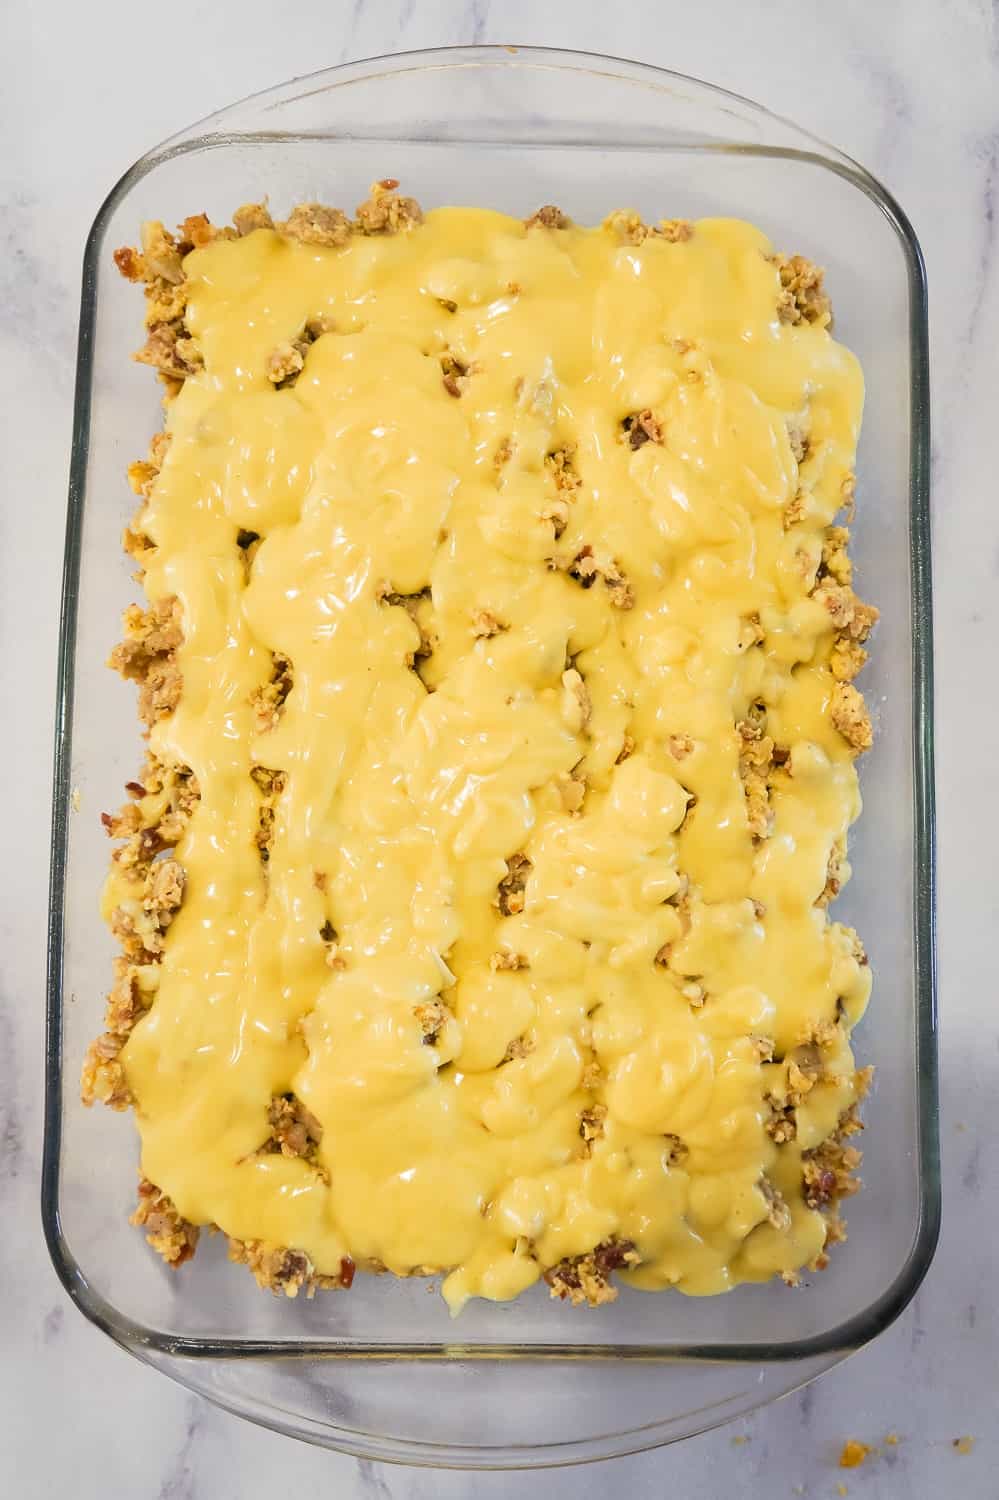 Hollandaise sauce poured over egg and sausage mixture in a baking dish